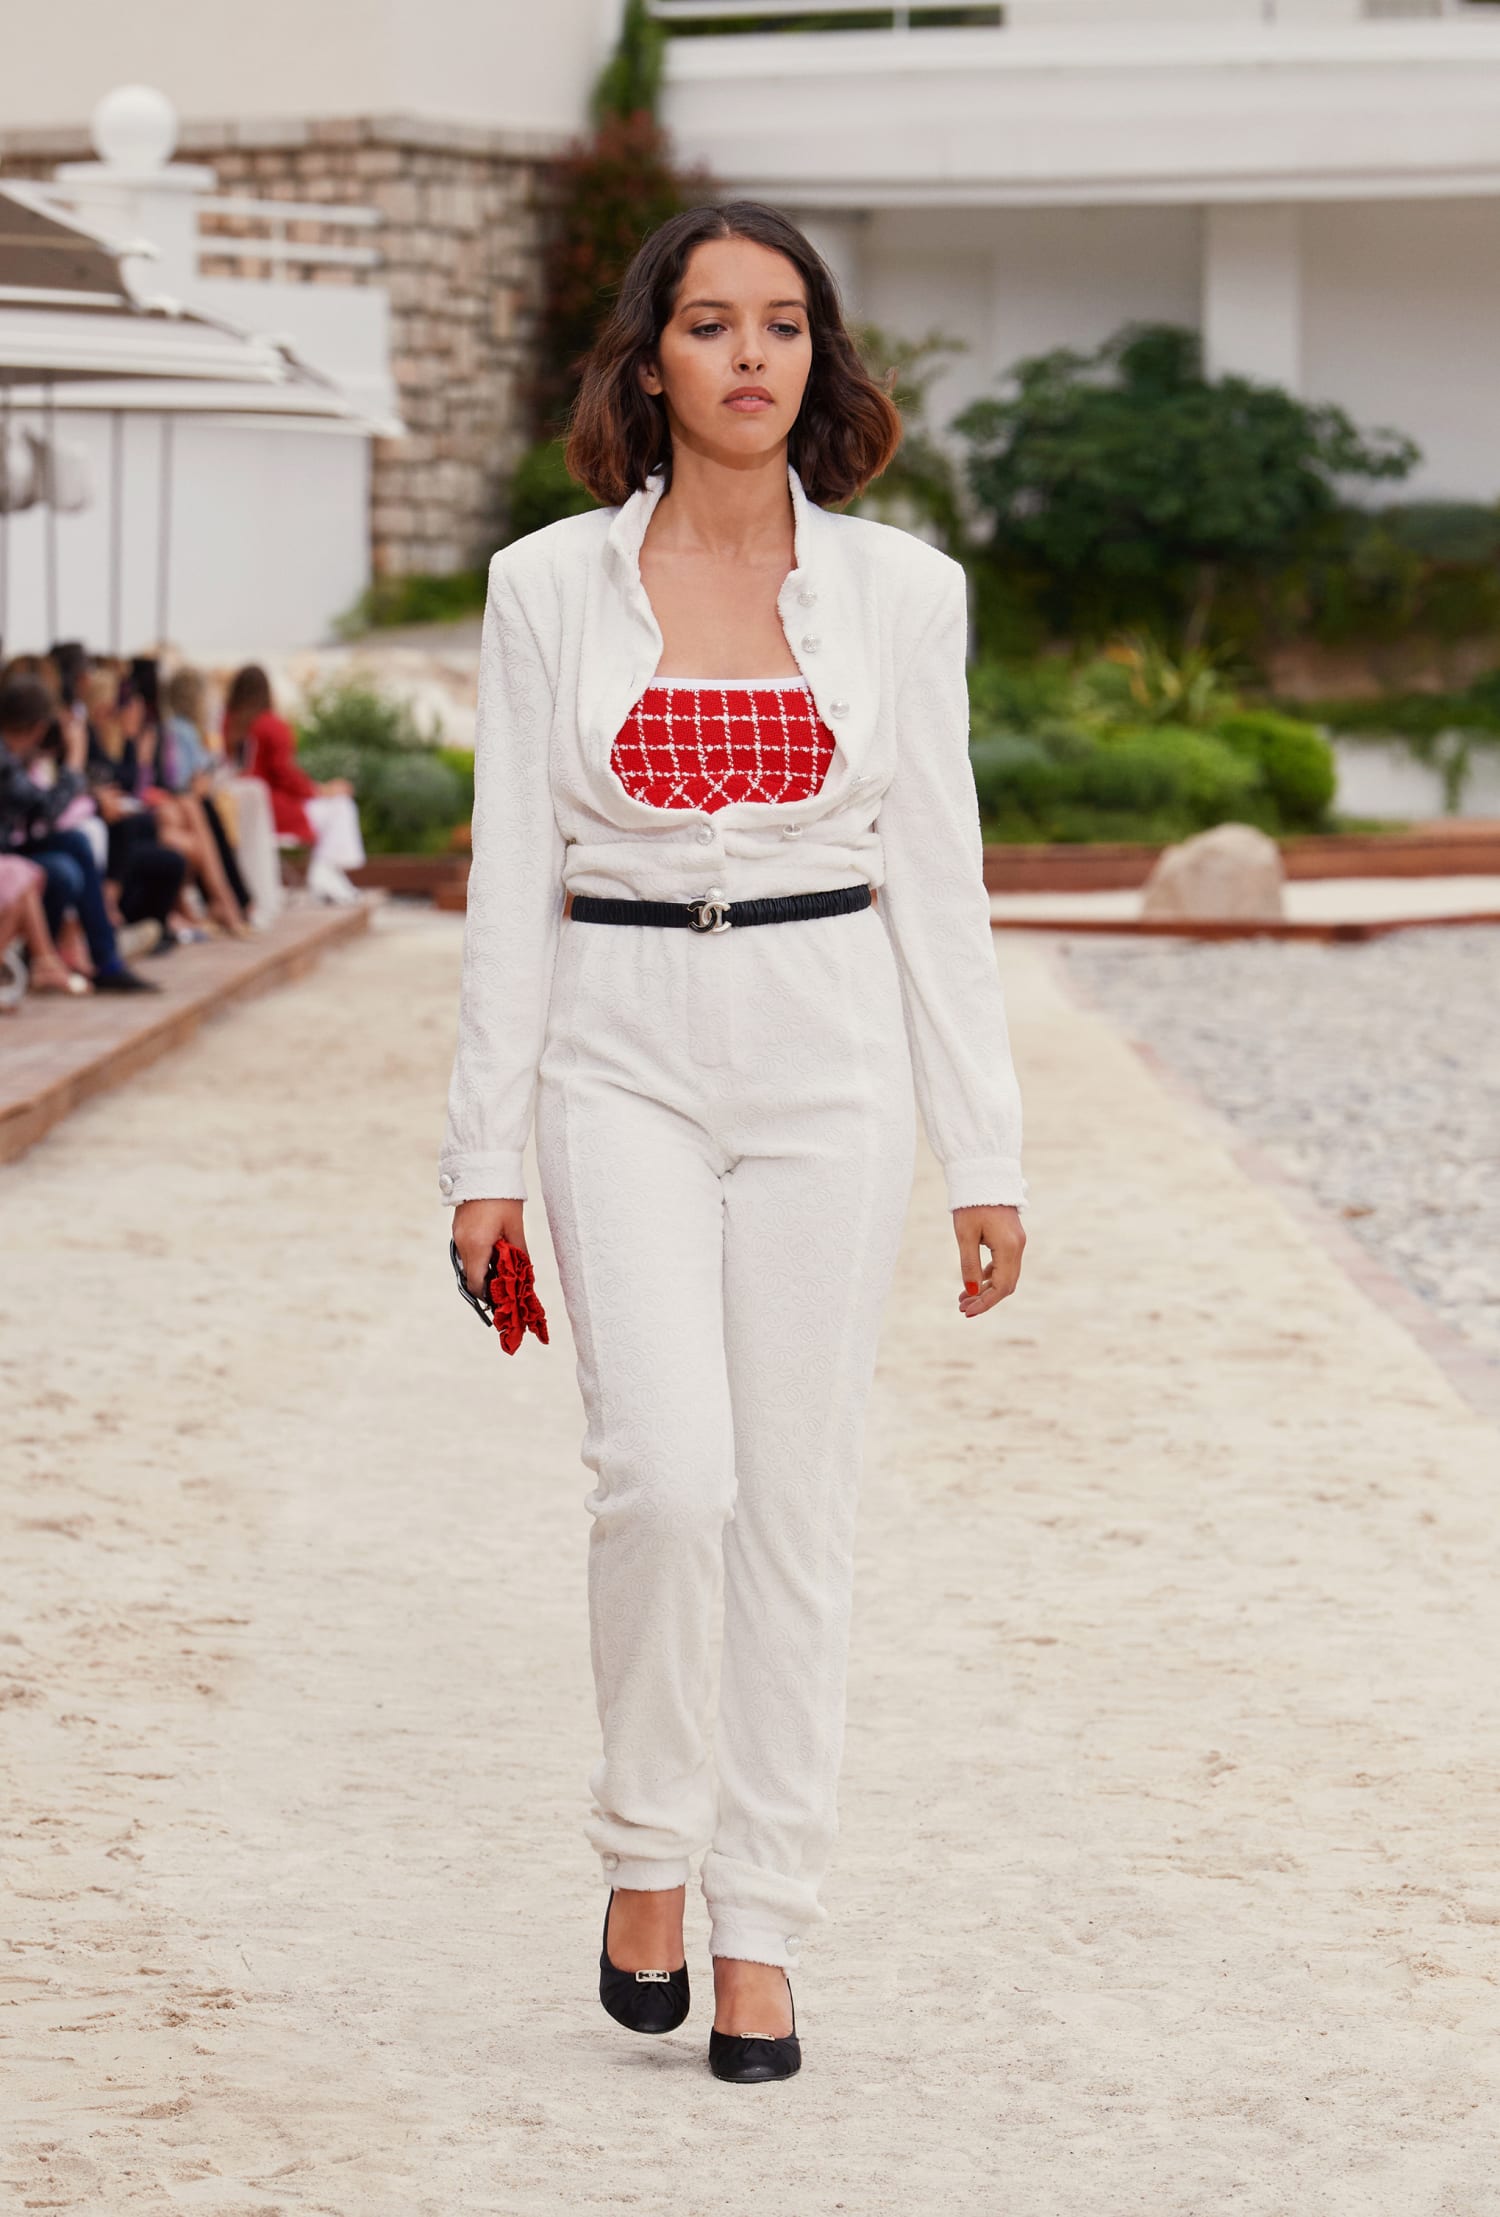 CHANEL CRUISE 2022/23 COLLECTION - Time International